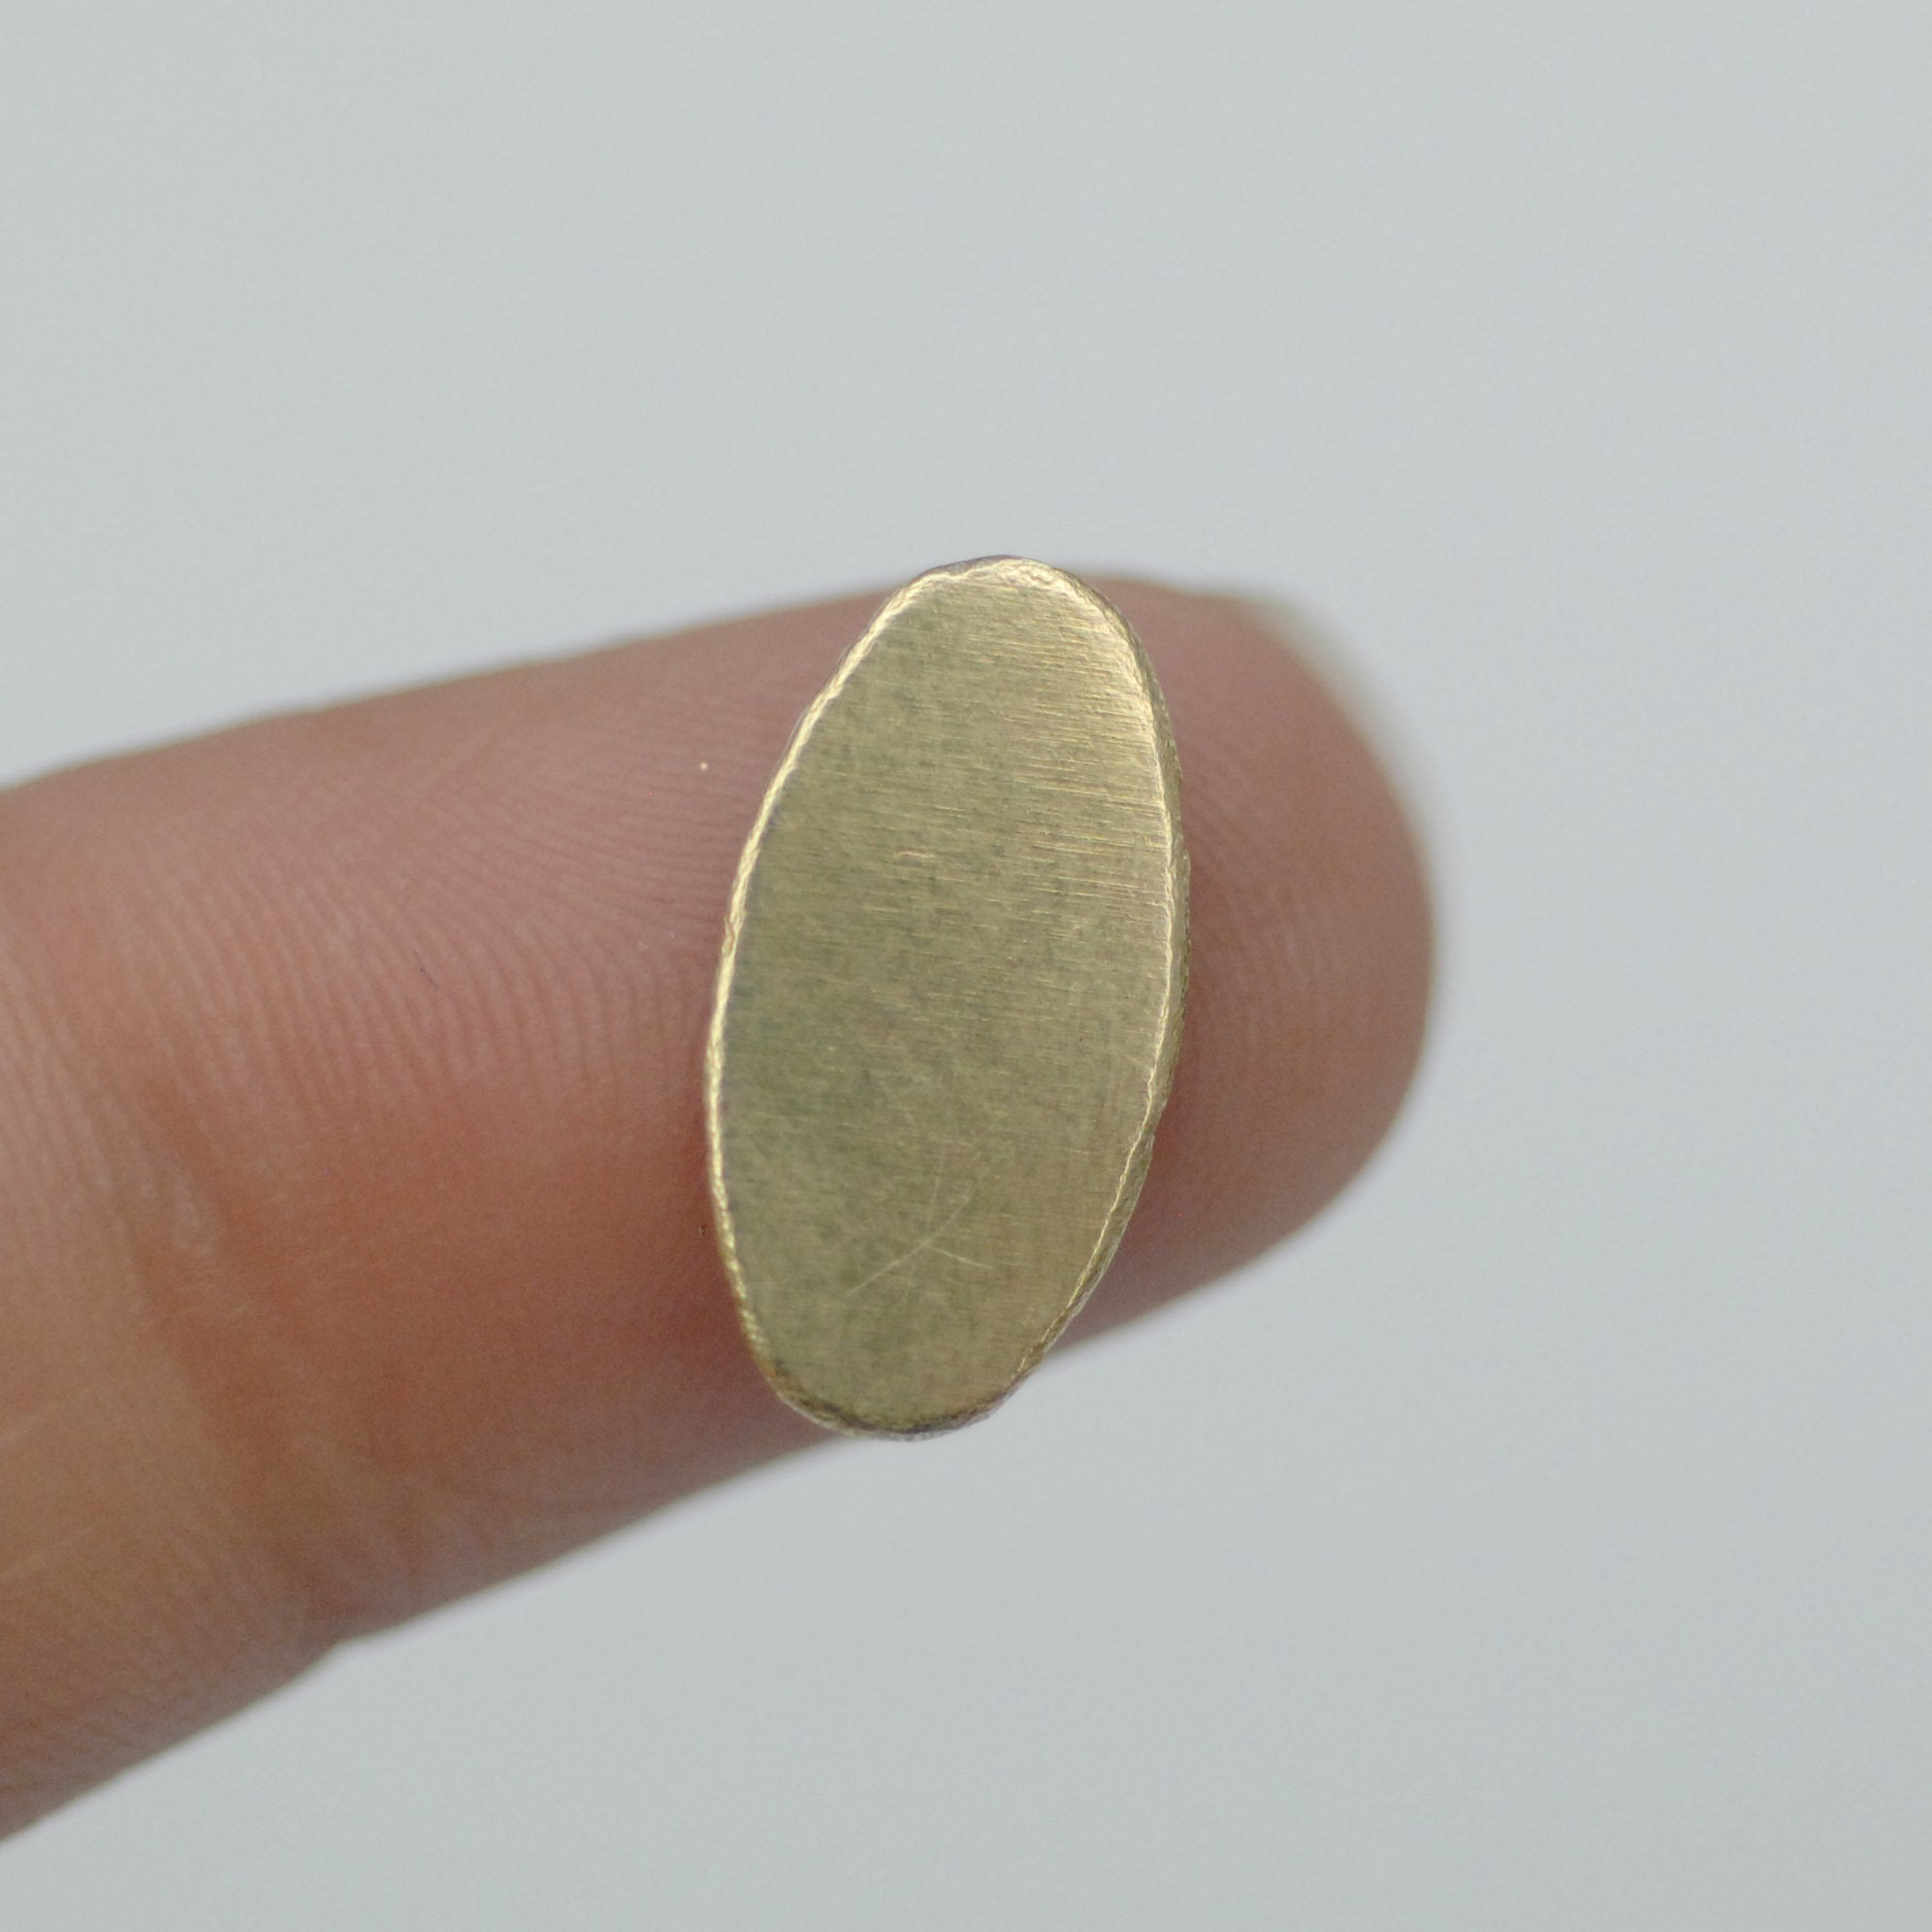 Long Oval shapes 14mm x 7mm 20g 22g 24g for soldering and making jewelry copper, brass, bronze, nickel silver